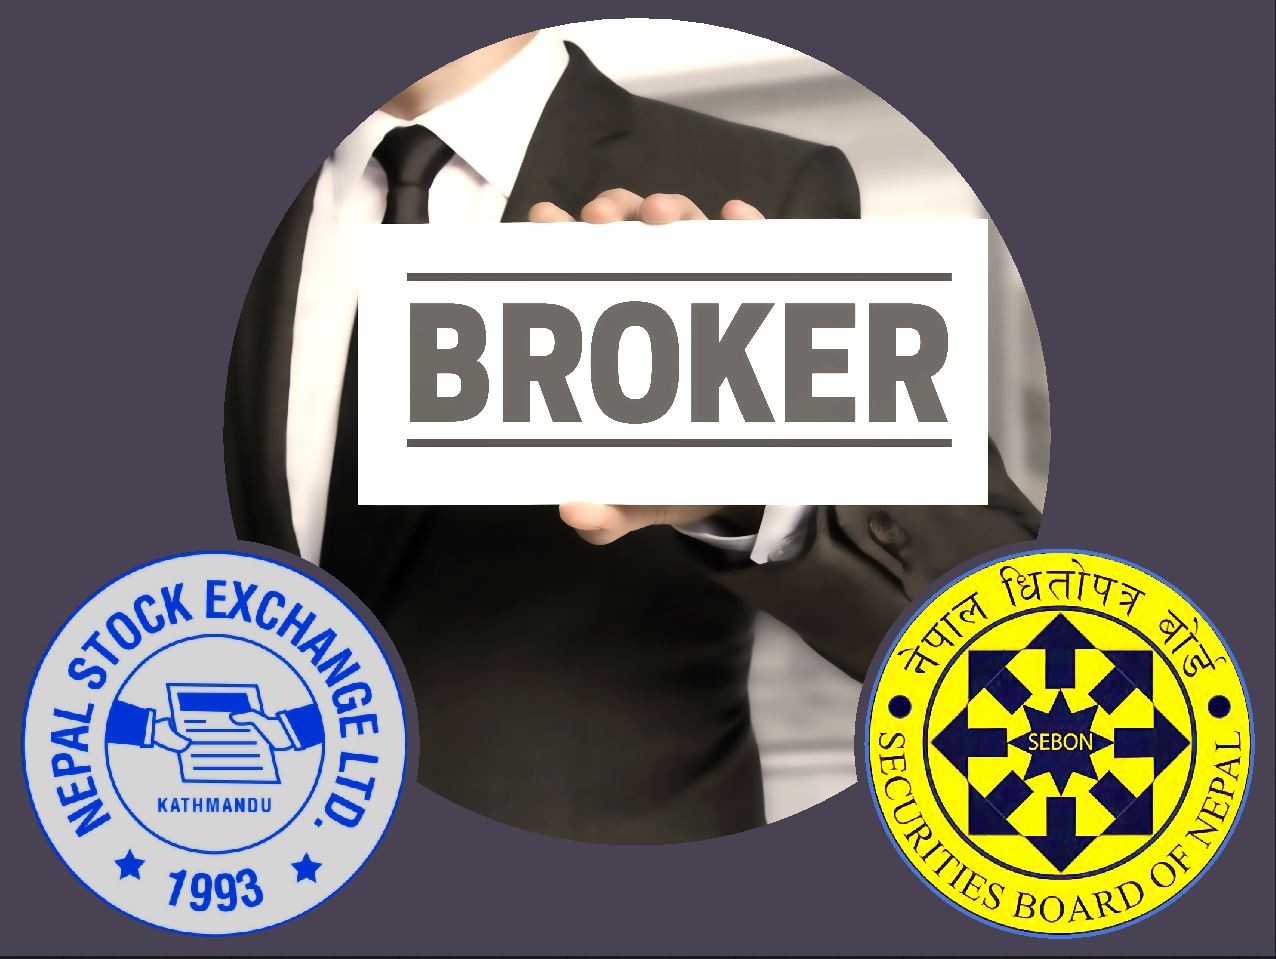 Now three level broker license by increasing paid up capital